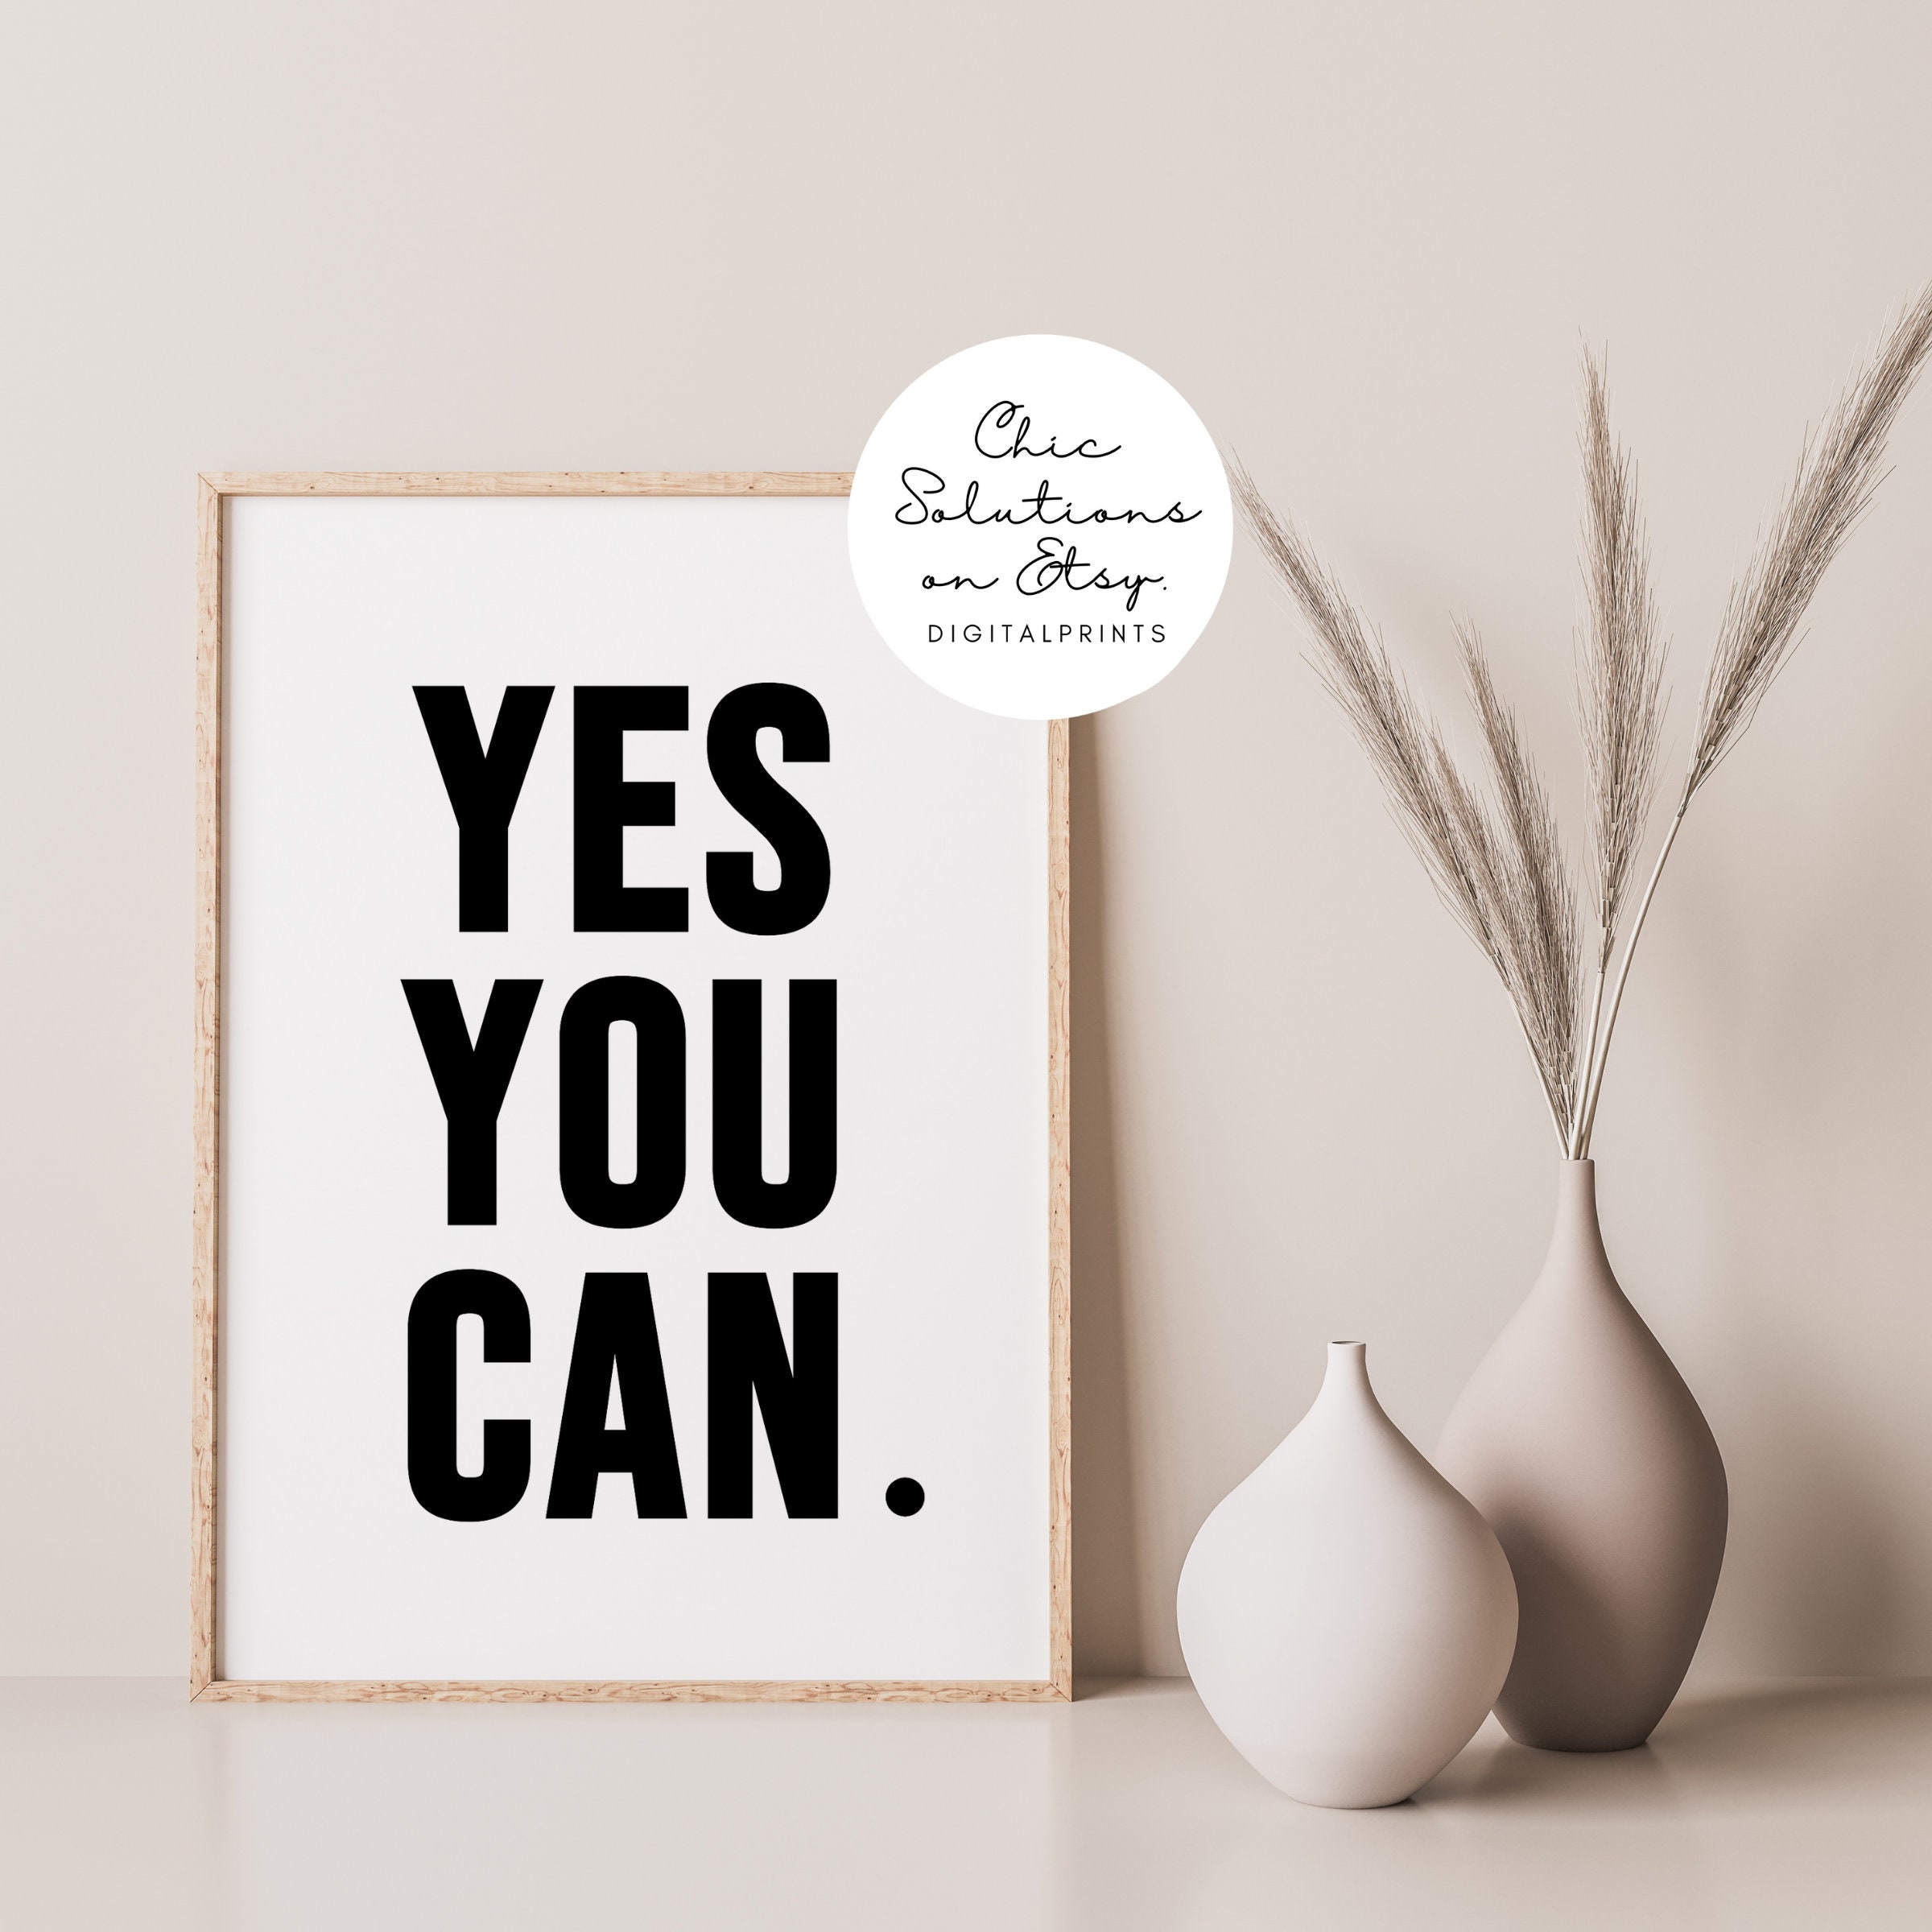 Yes You Can print by Typobox